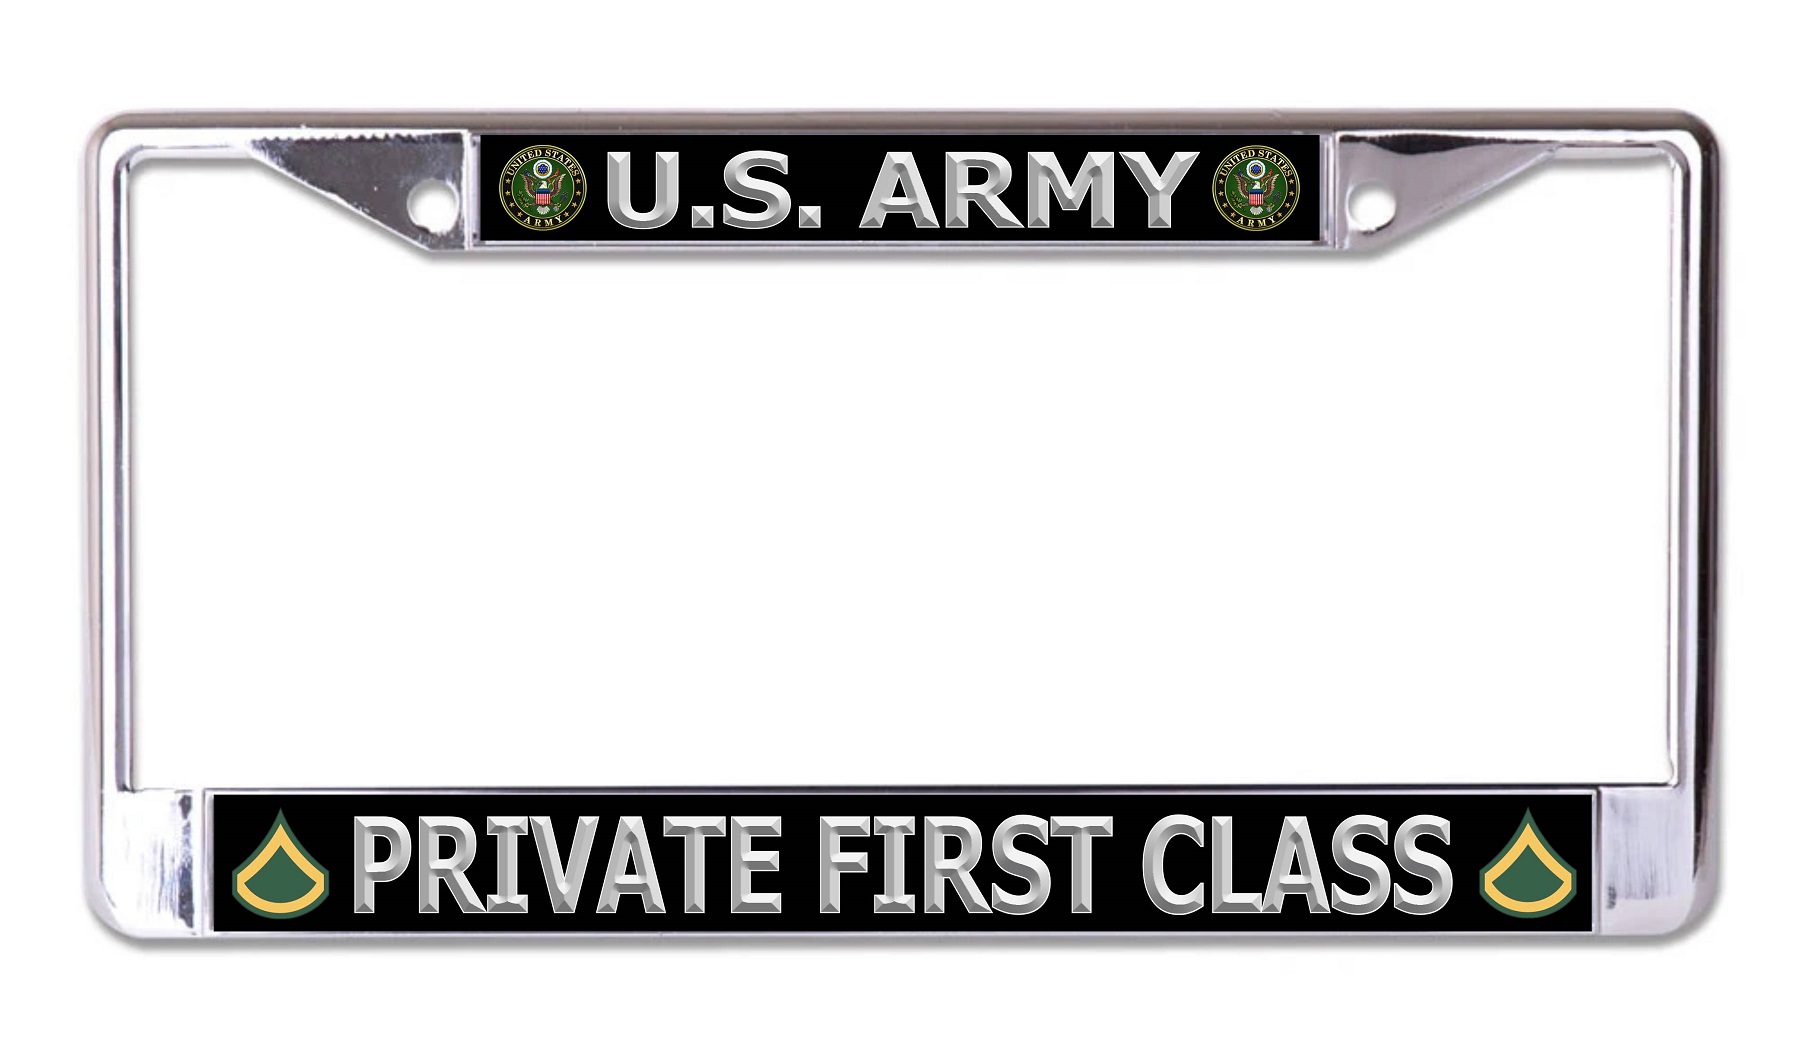 U.S. Army Private First Class Silver Letters Chrome License Plate FRAME